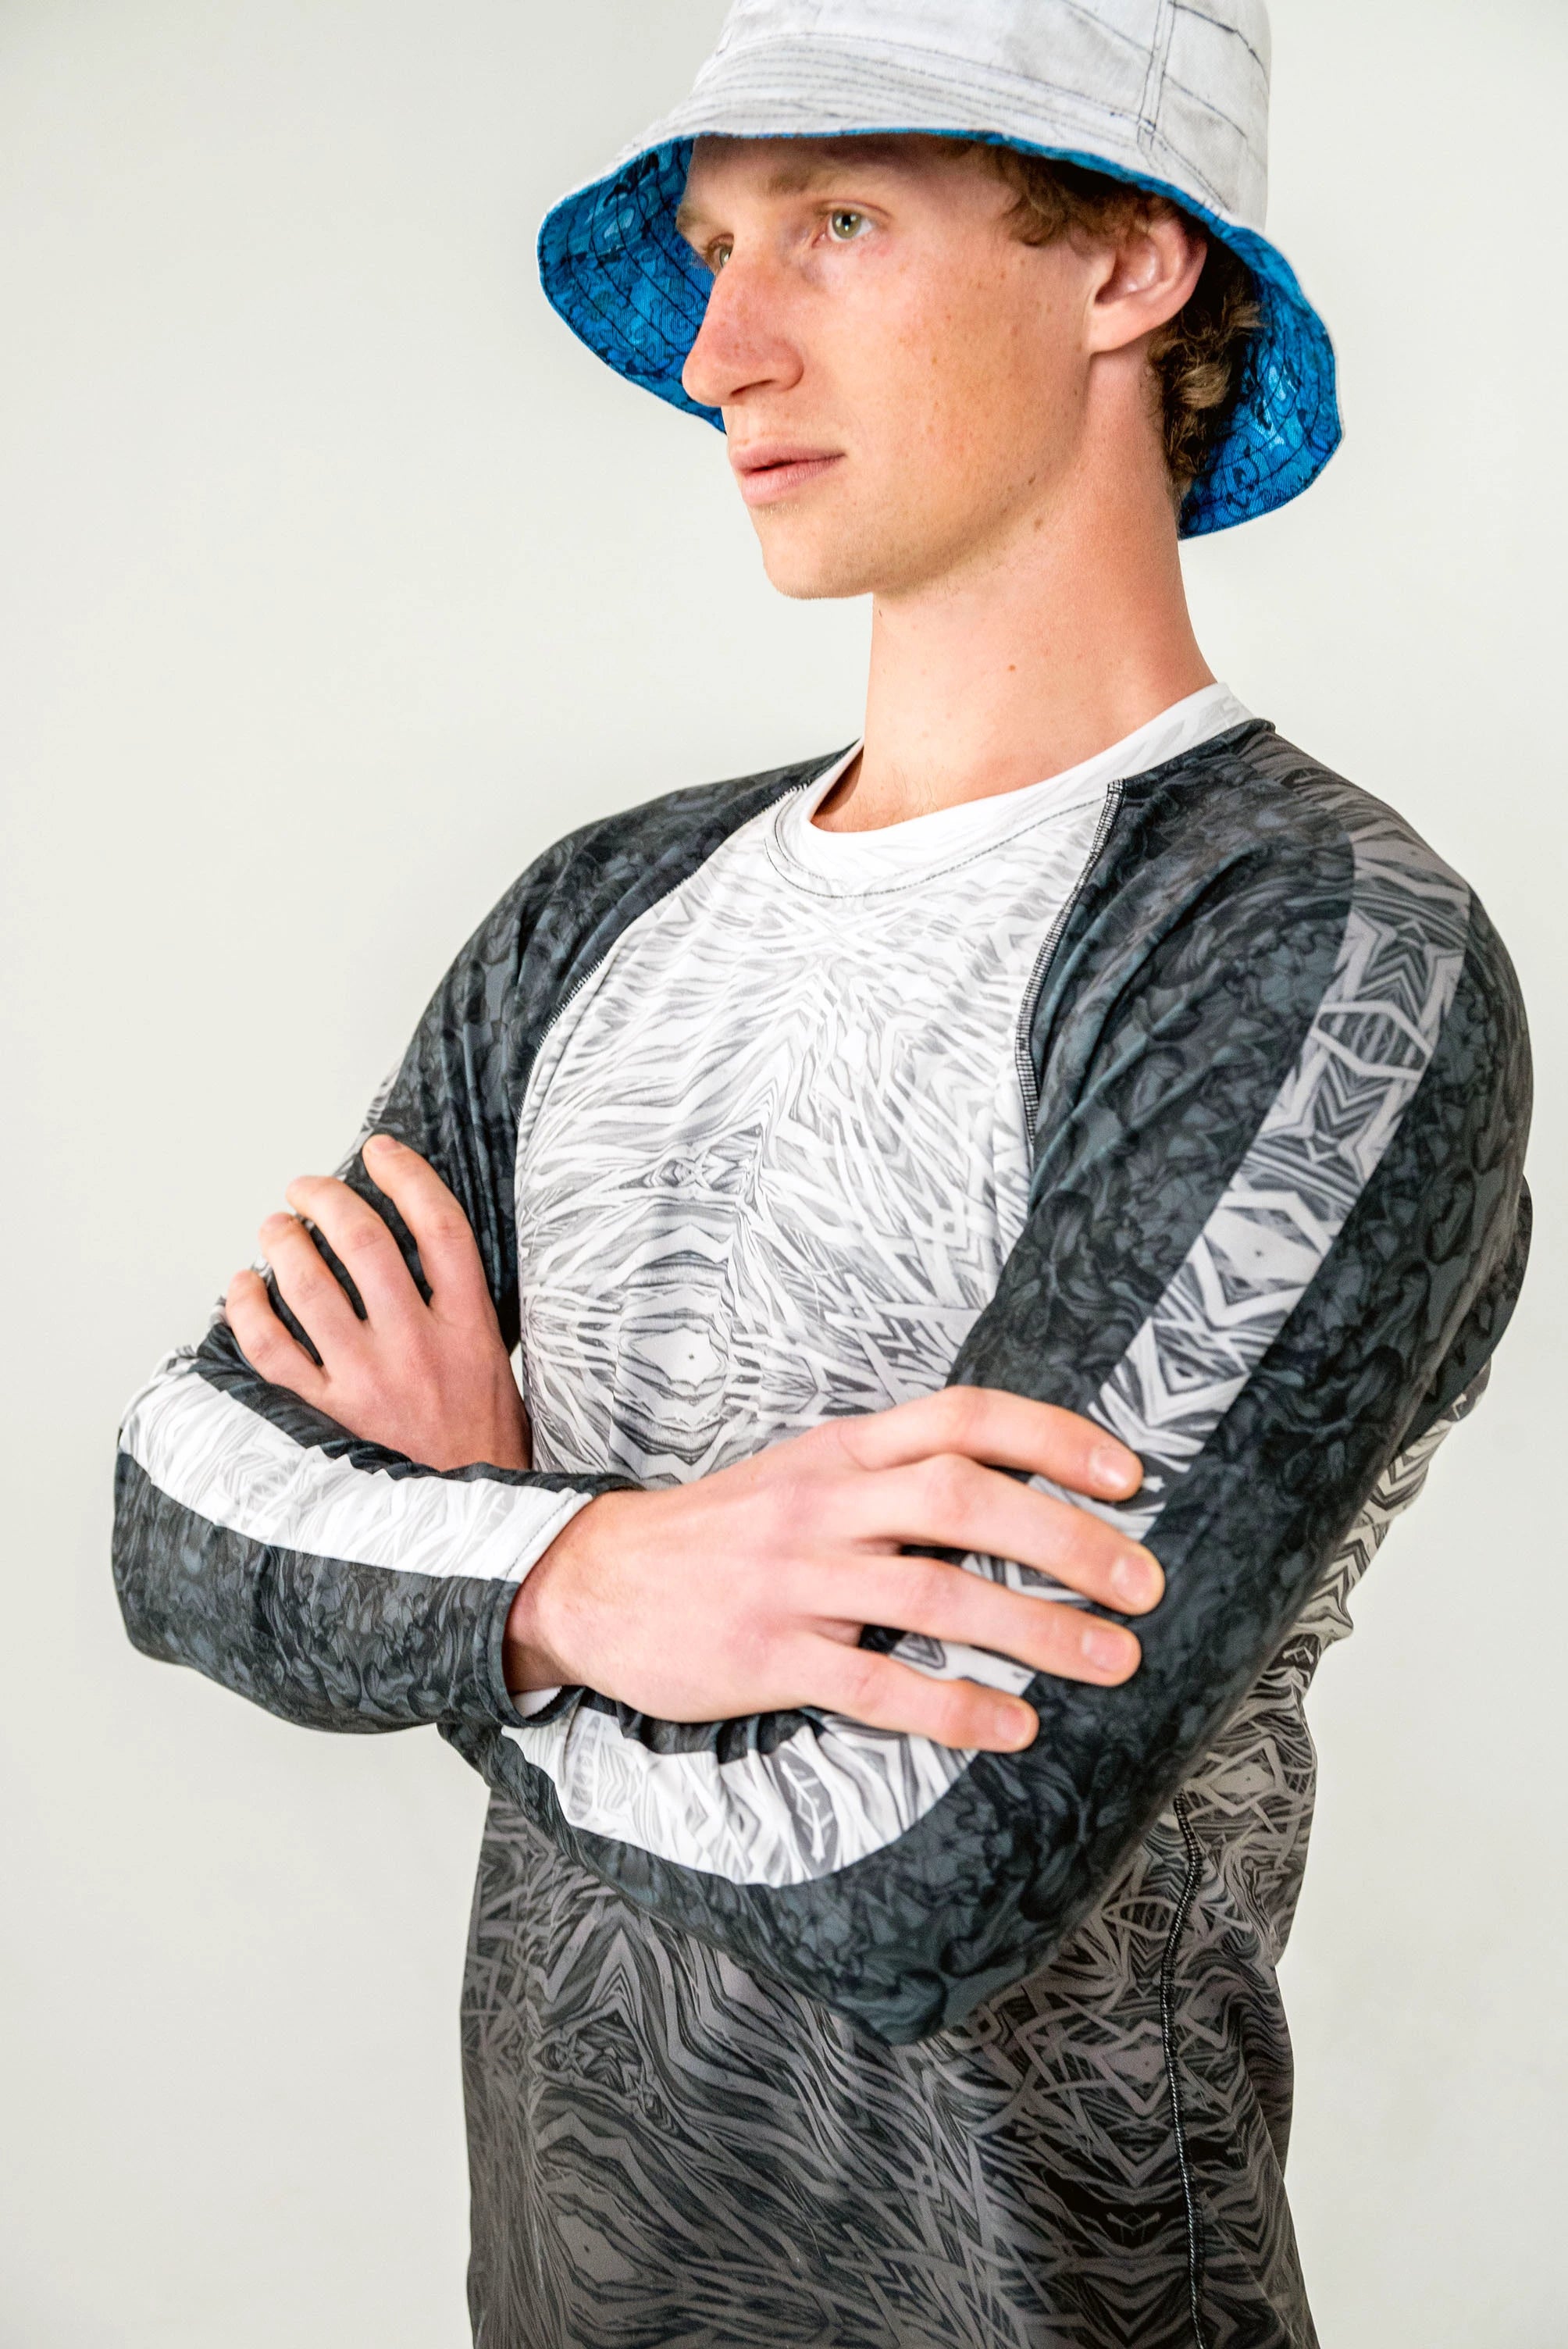 Model wearing blue and white bucket hat with a black and white rash guard.